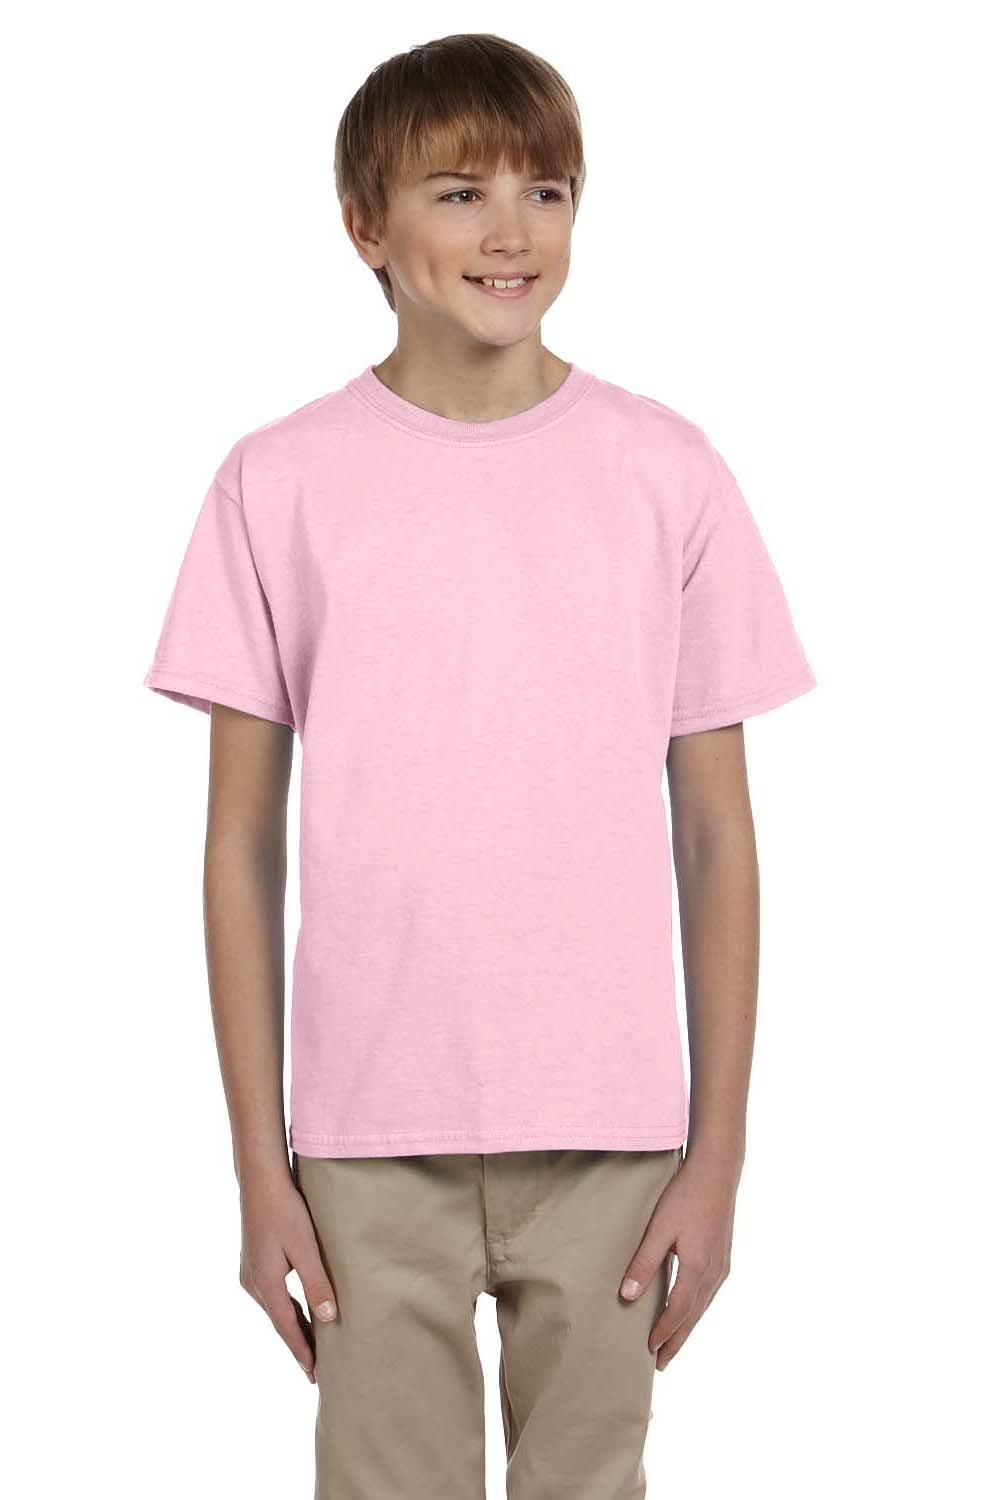 Hanes 5370 Youth EcoSmart Short Sleeve Crewneck T-Shirt Pale Pink Front